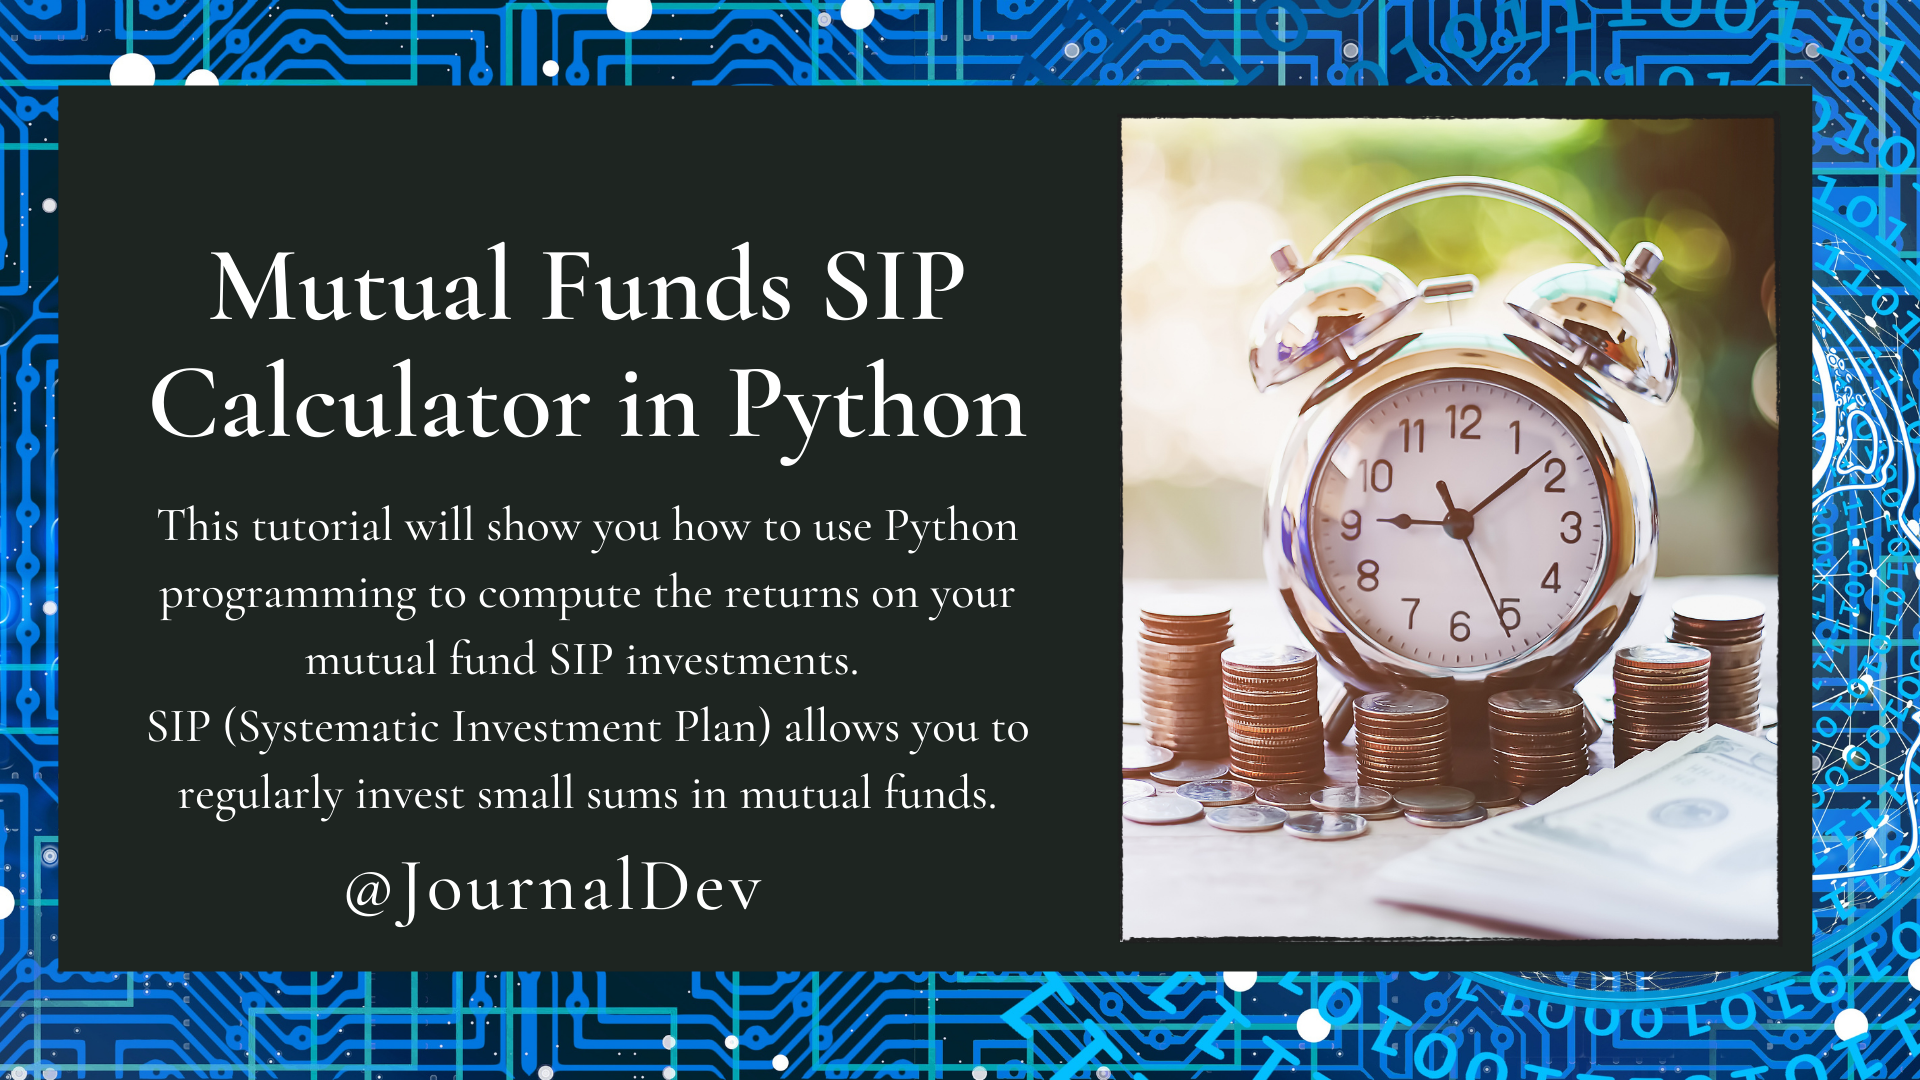 Mutual Funds SIP Calculator in Python